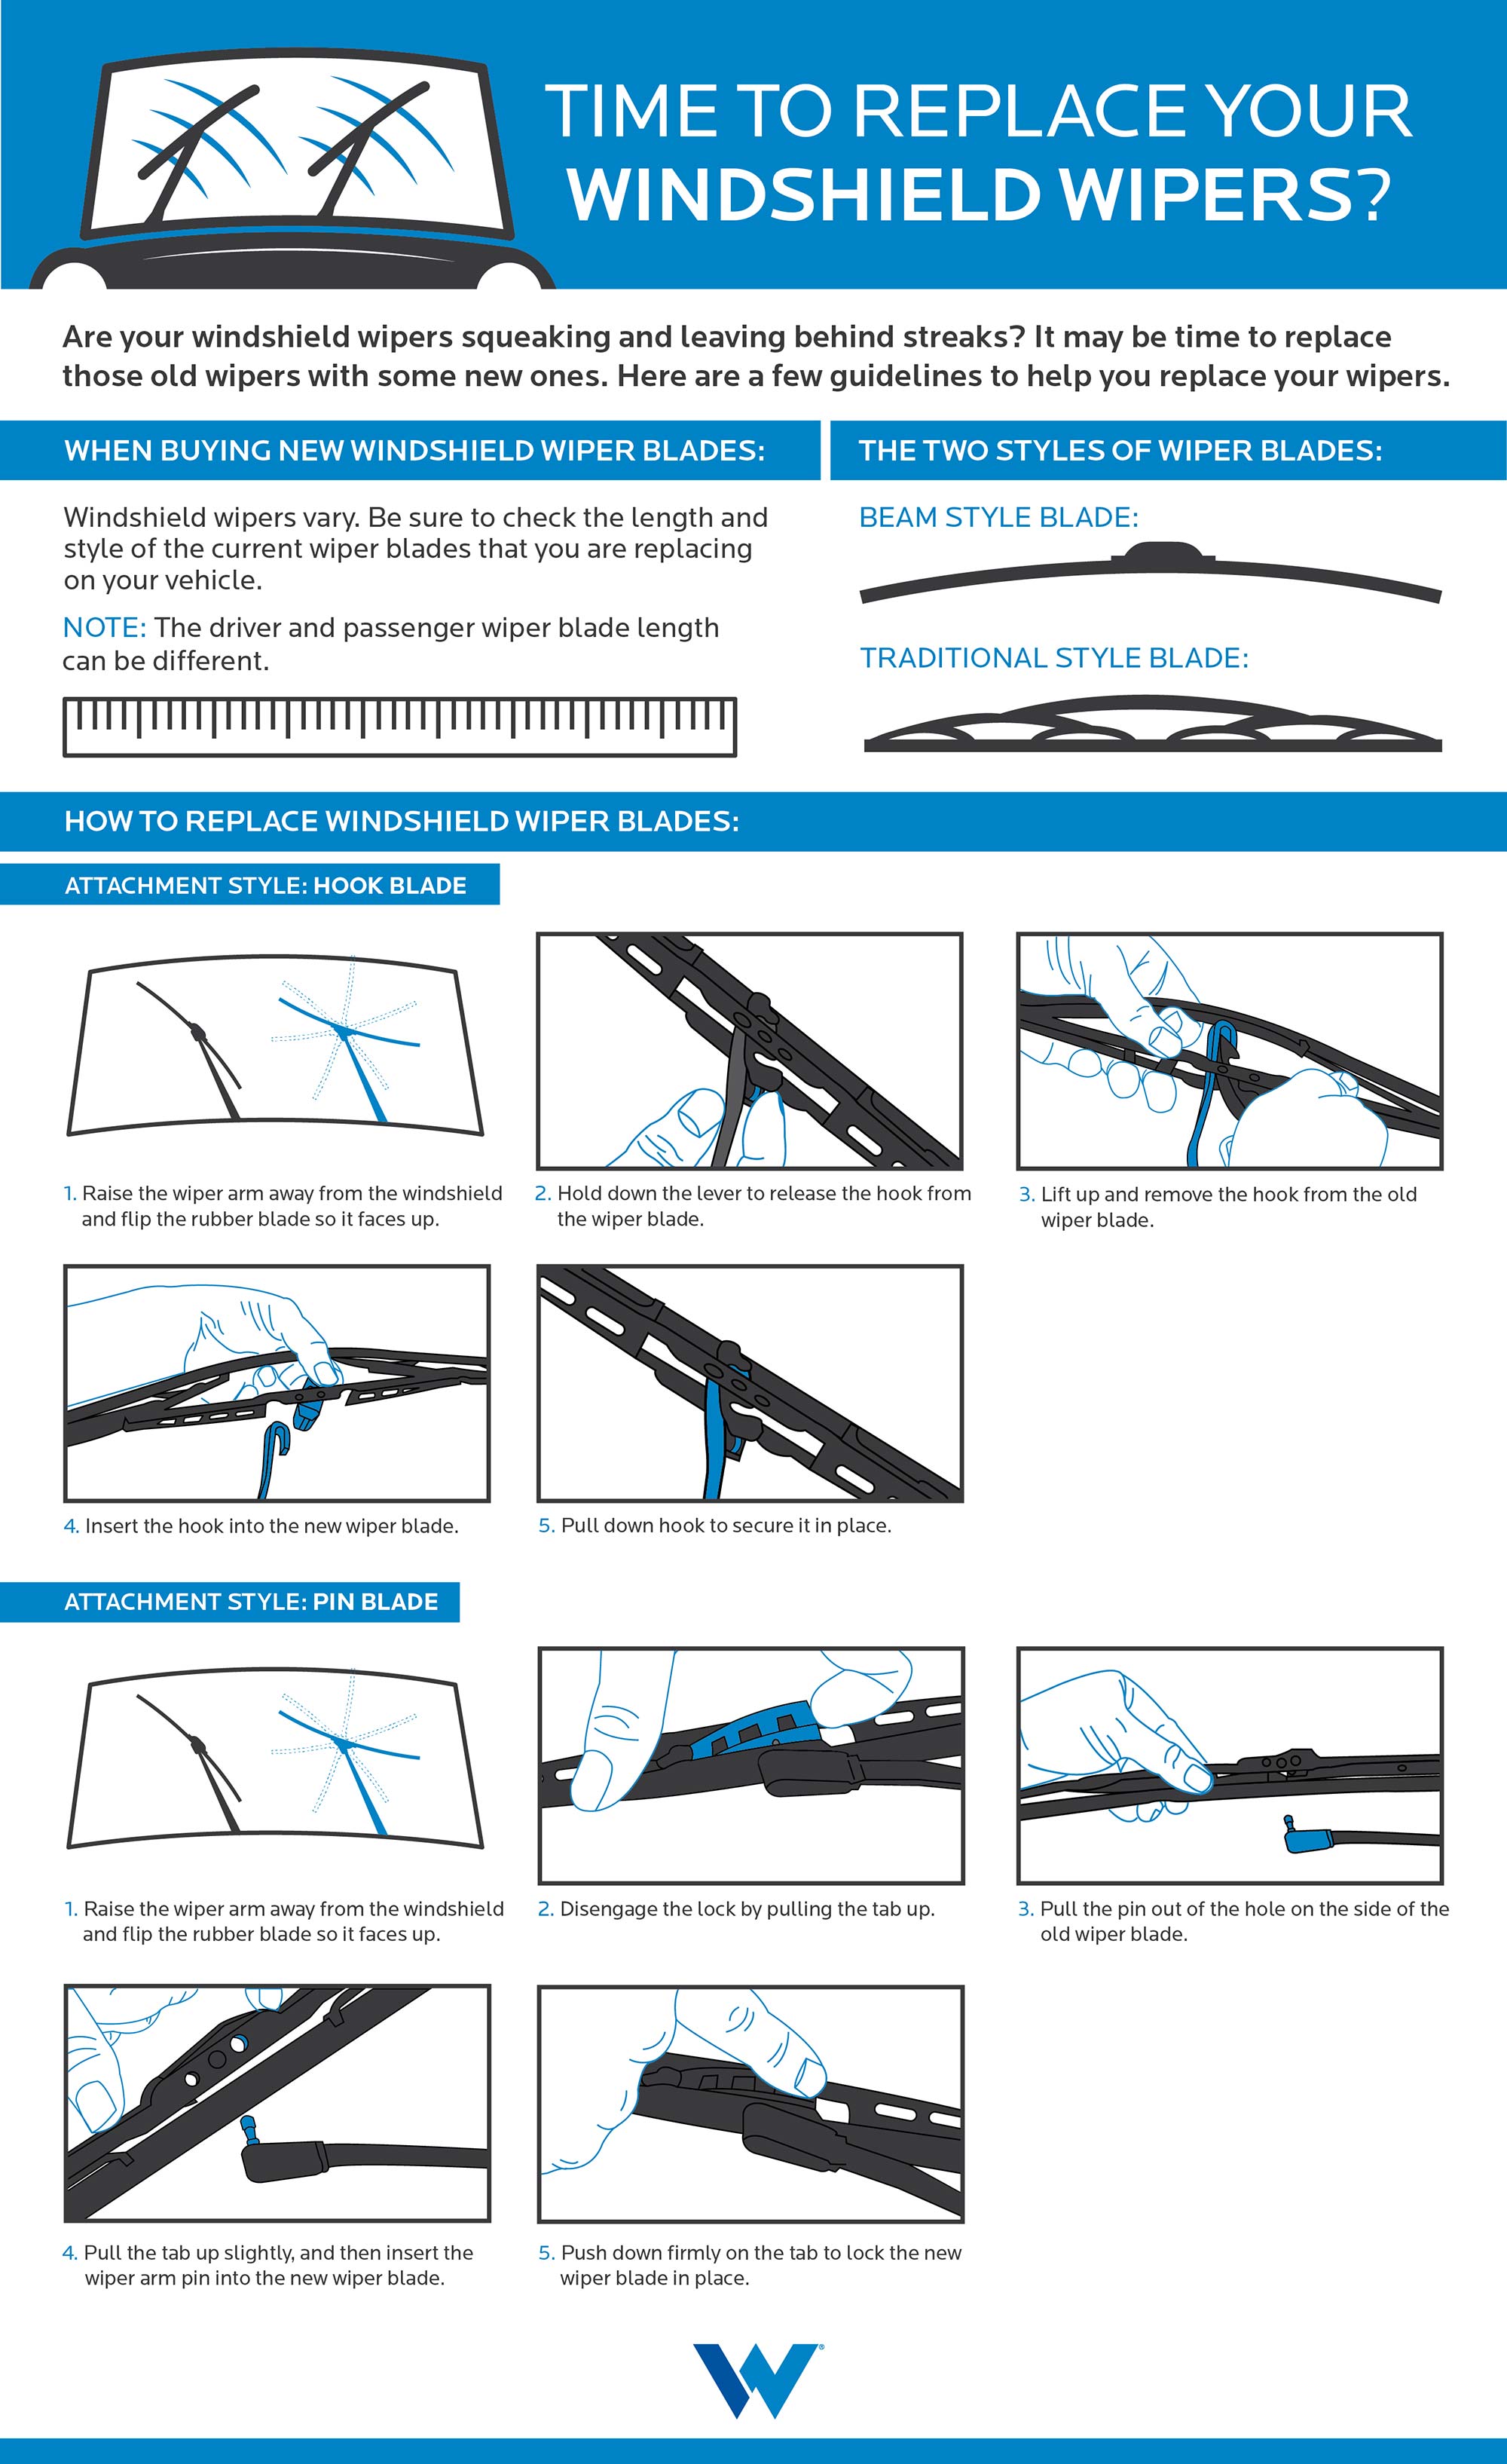 infographic with tips on replacing your windshield wipers.